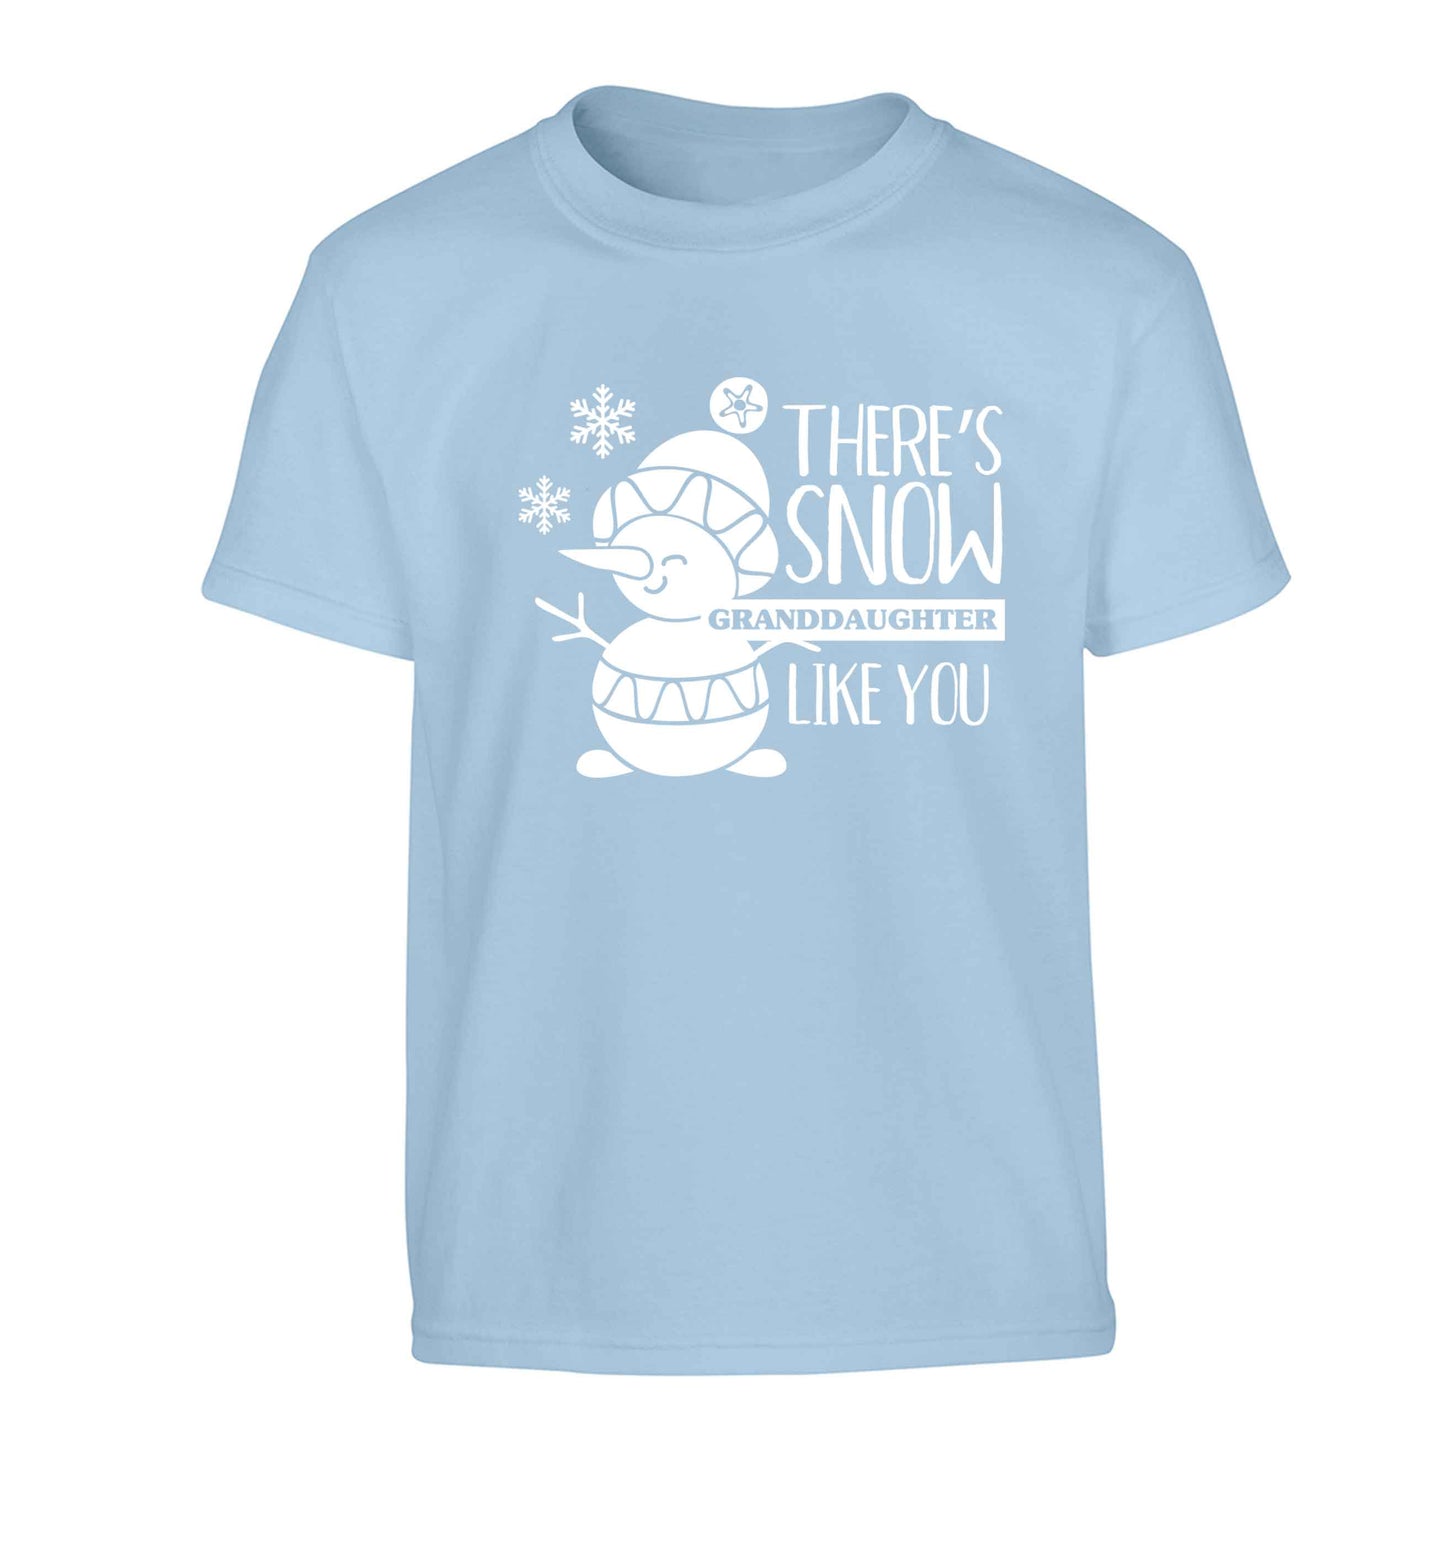 There's snow granddaughter like you Children's light blue Tshirt 12-13 Years